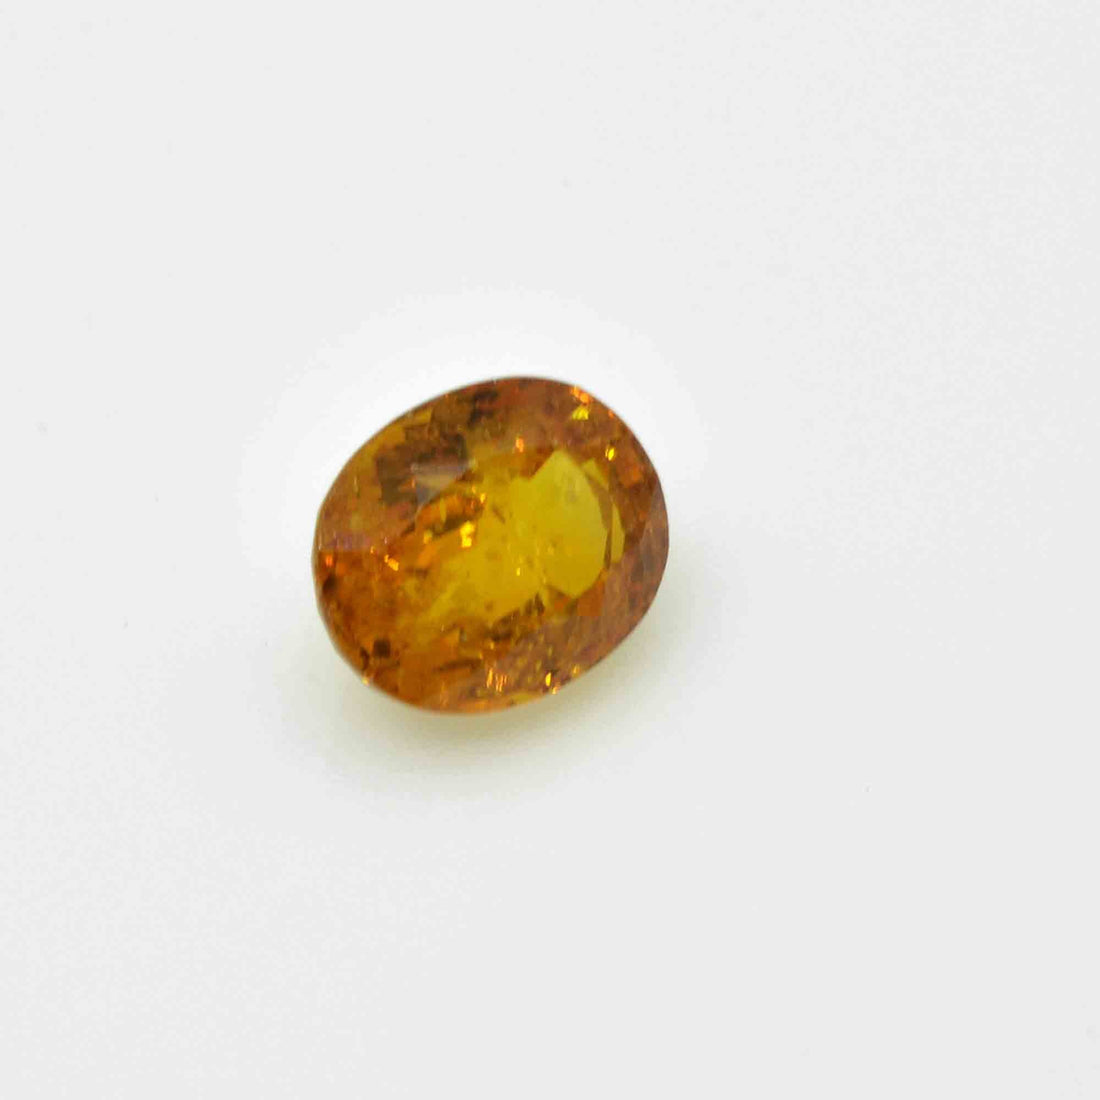 2.73 Cts Natural Yellow Sapphire Loose Gemstone Oval Cut